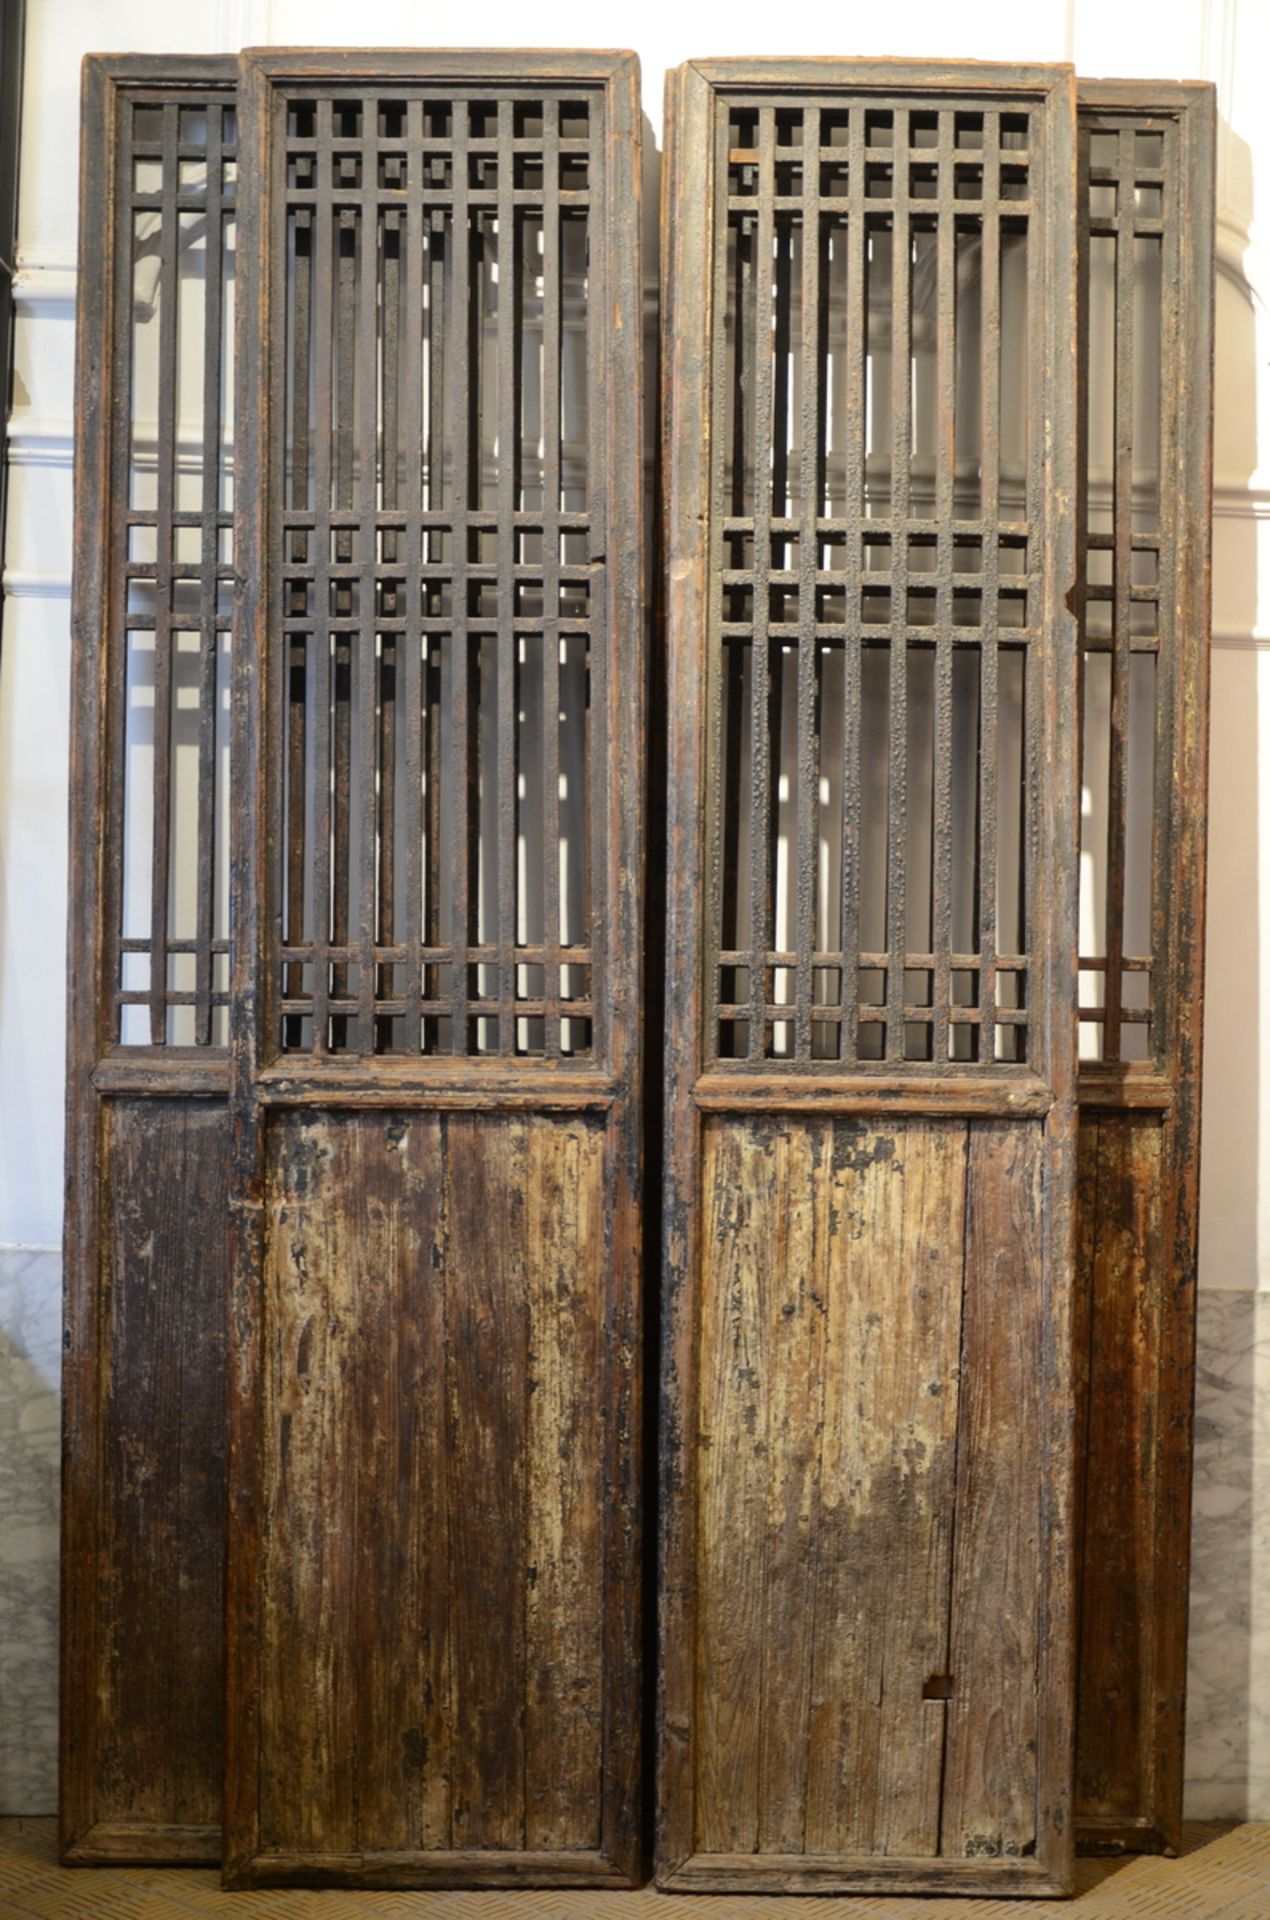 Set of 4 Chinese wooden screens